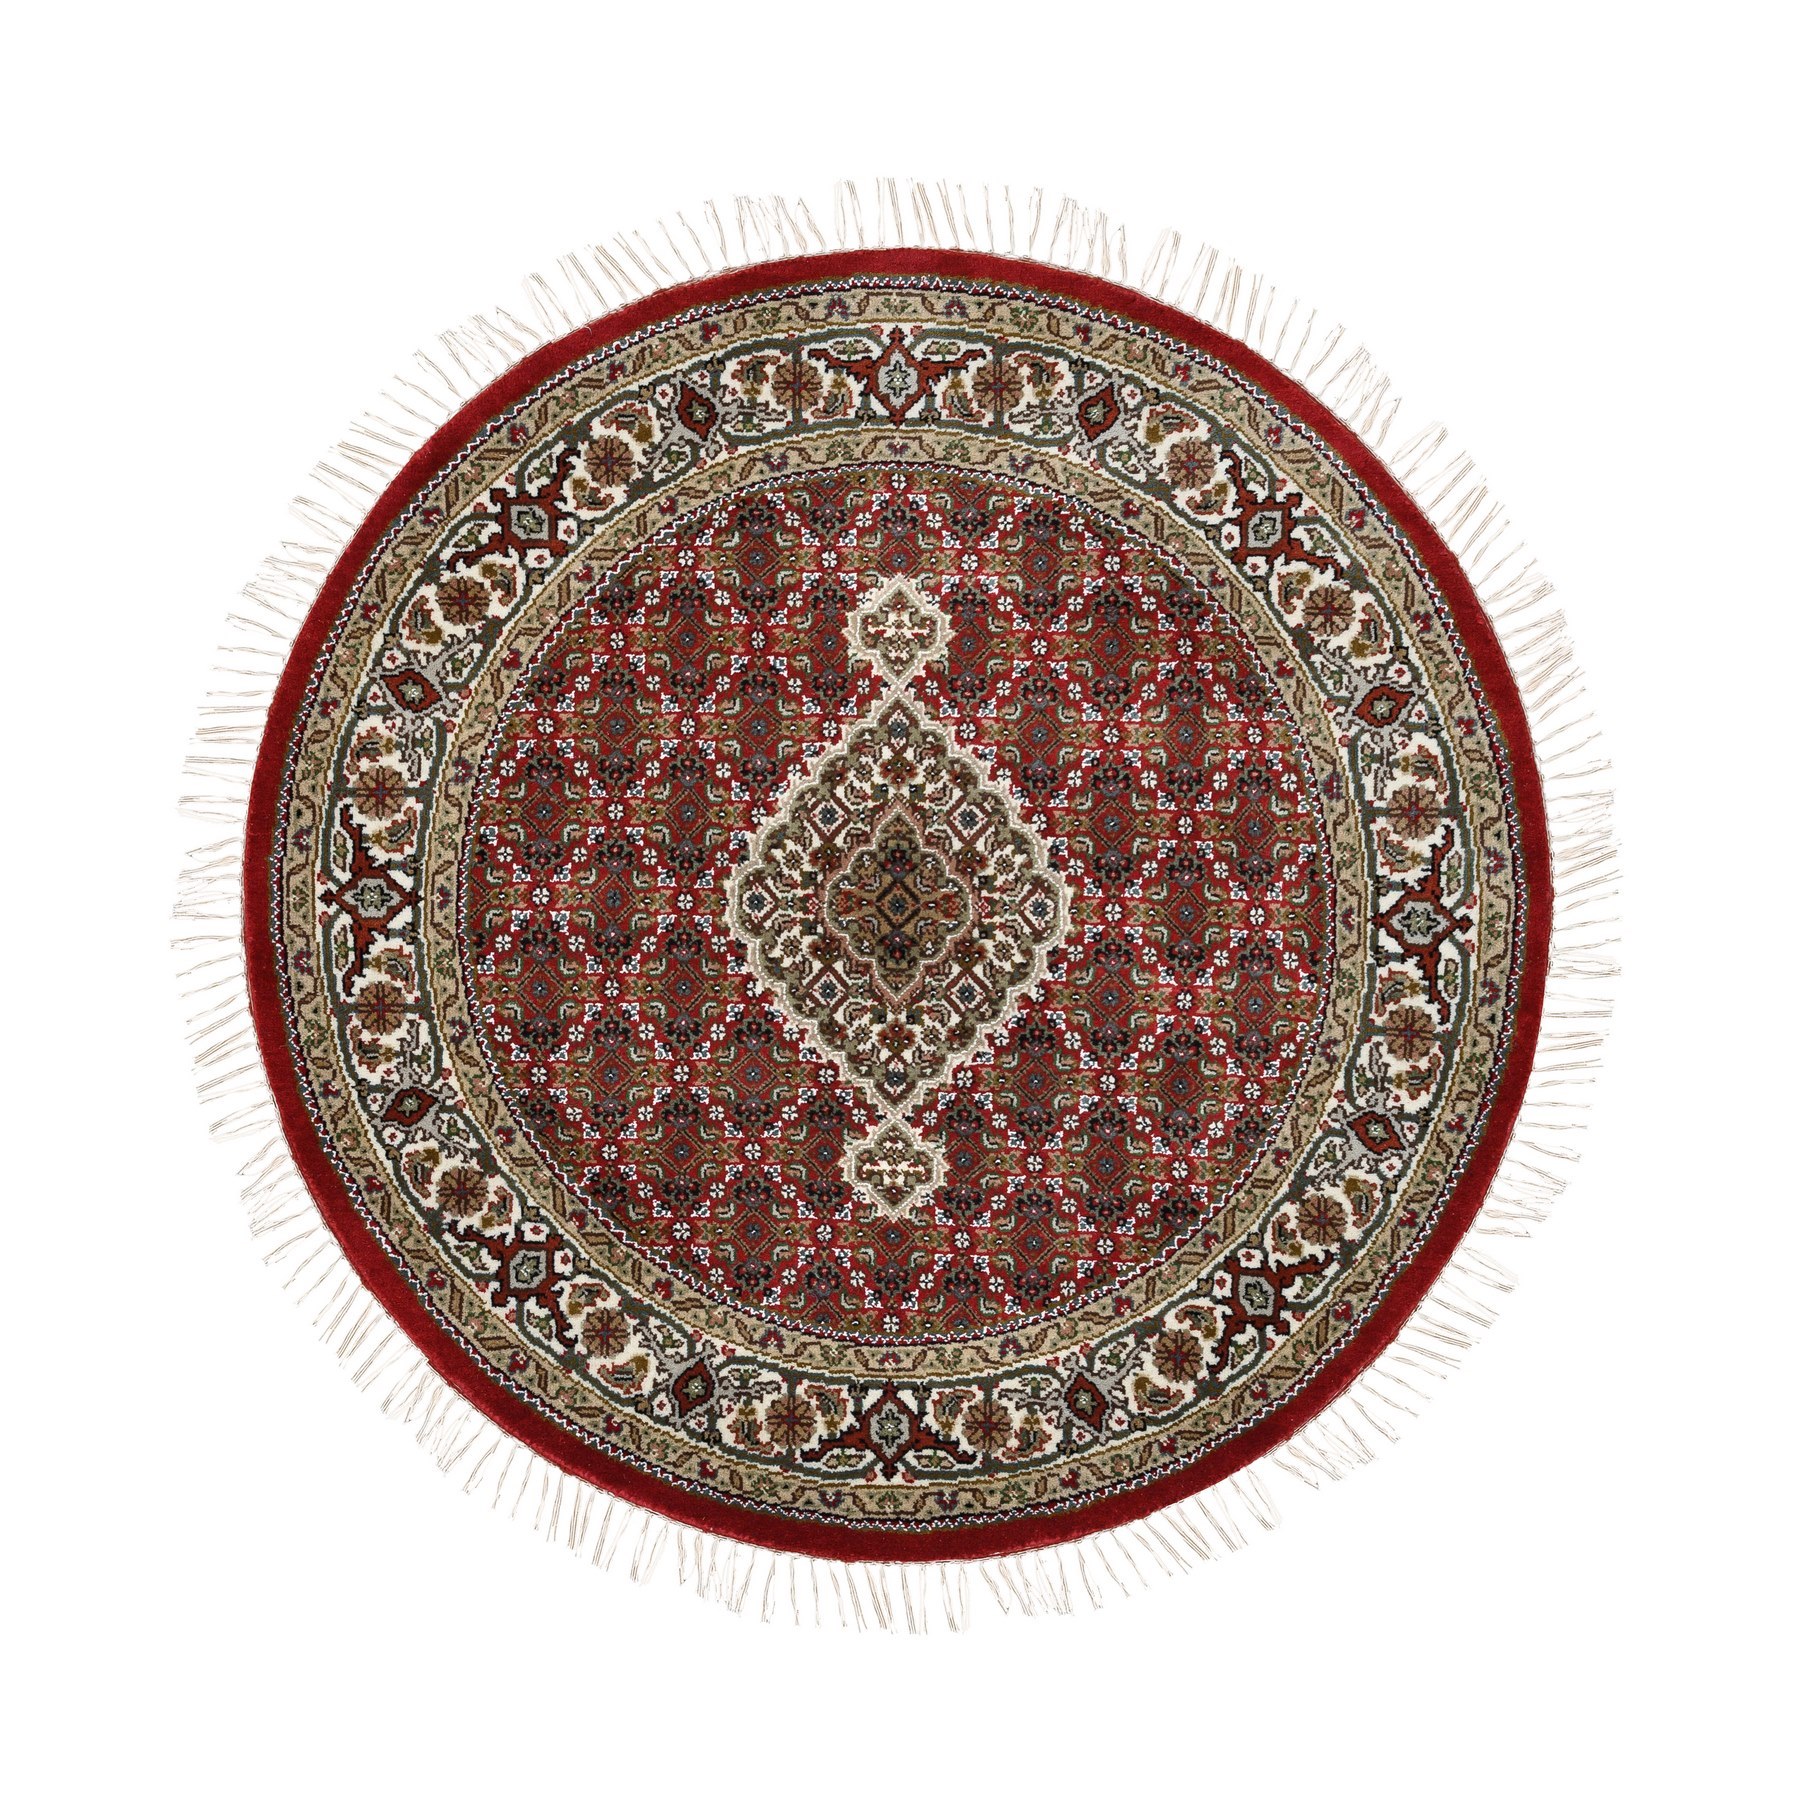 Pirniakan Collection Hand Knotted Red Rug No: 1124884